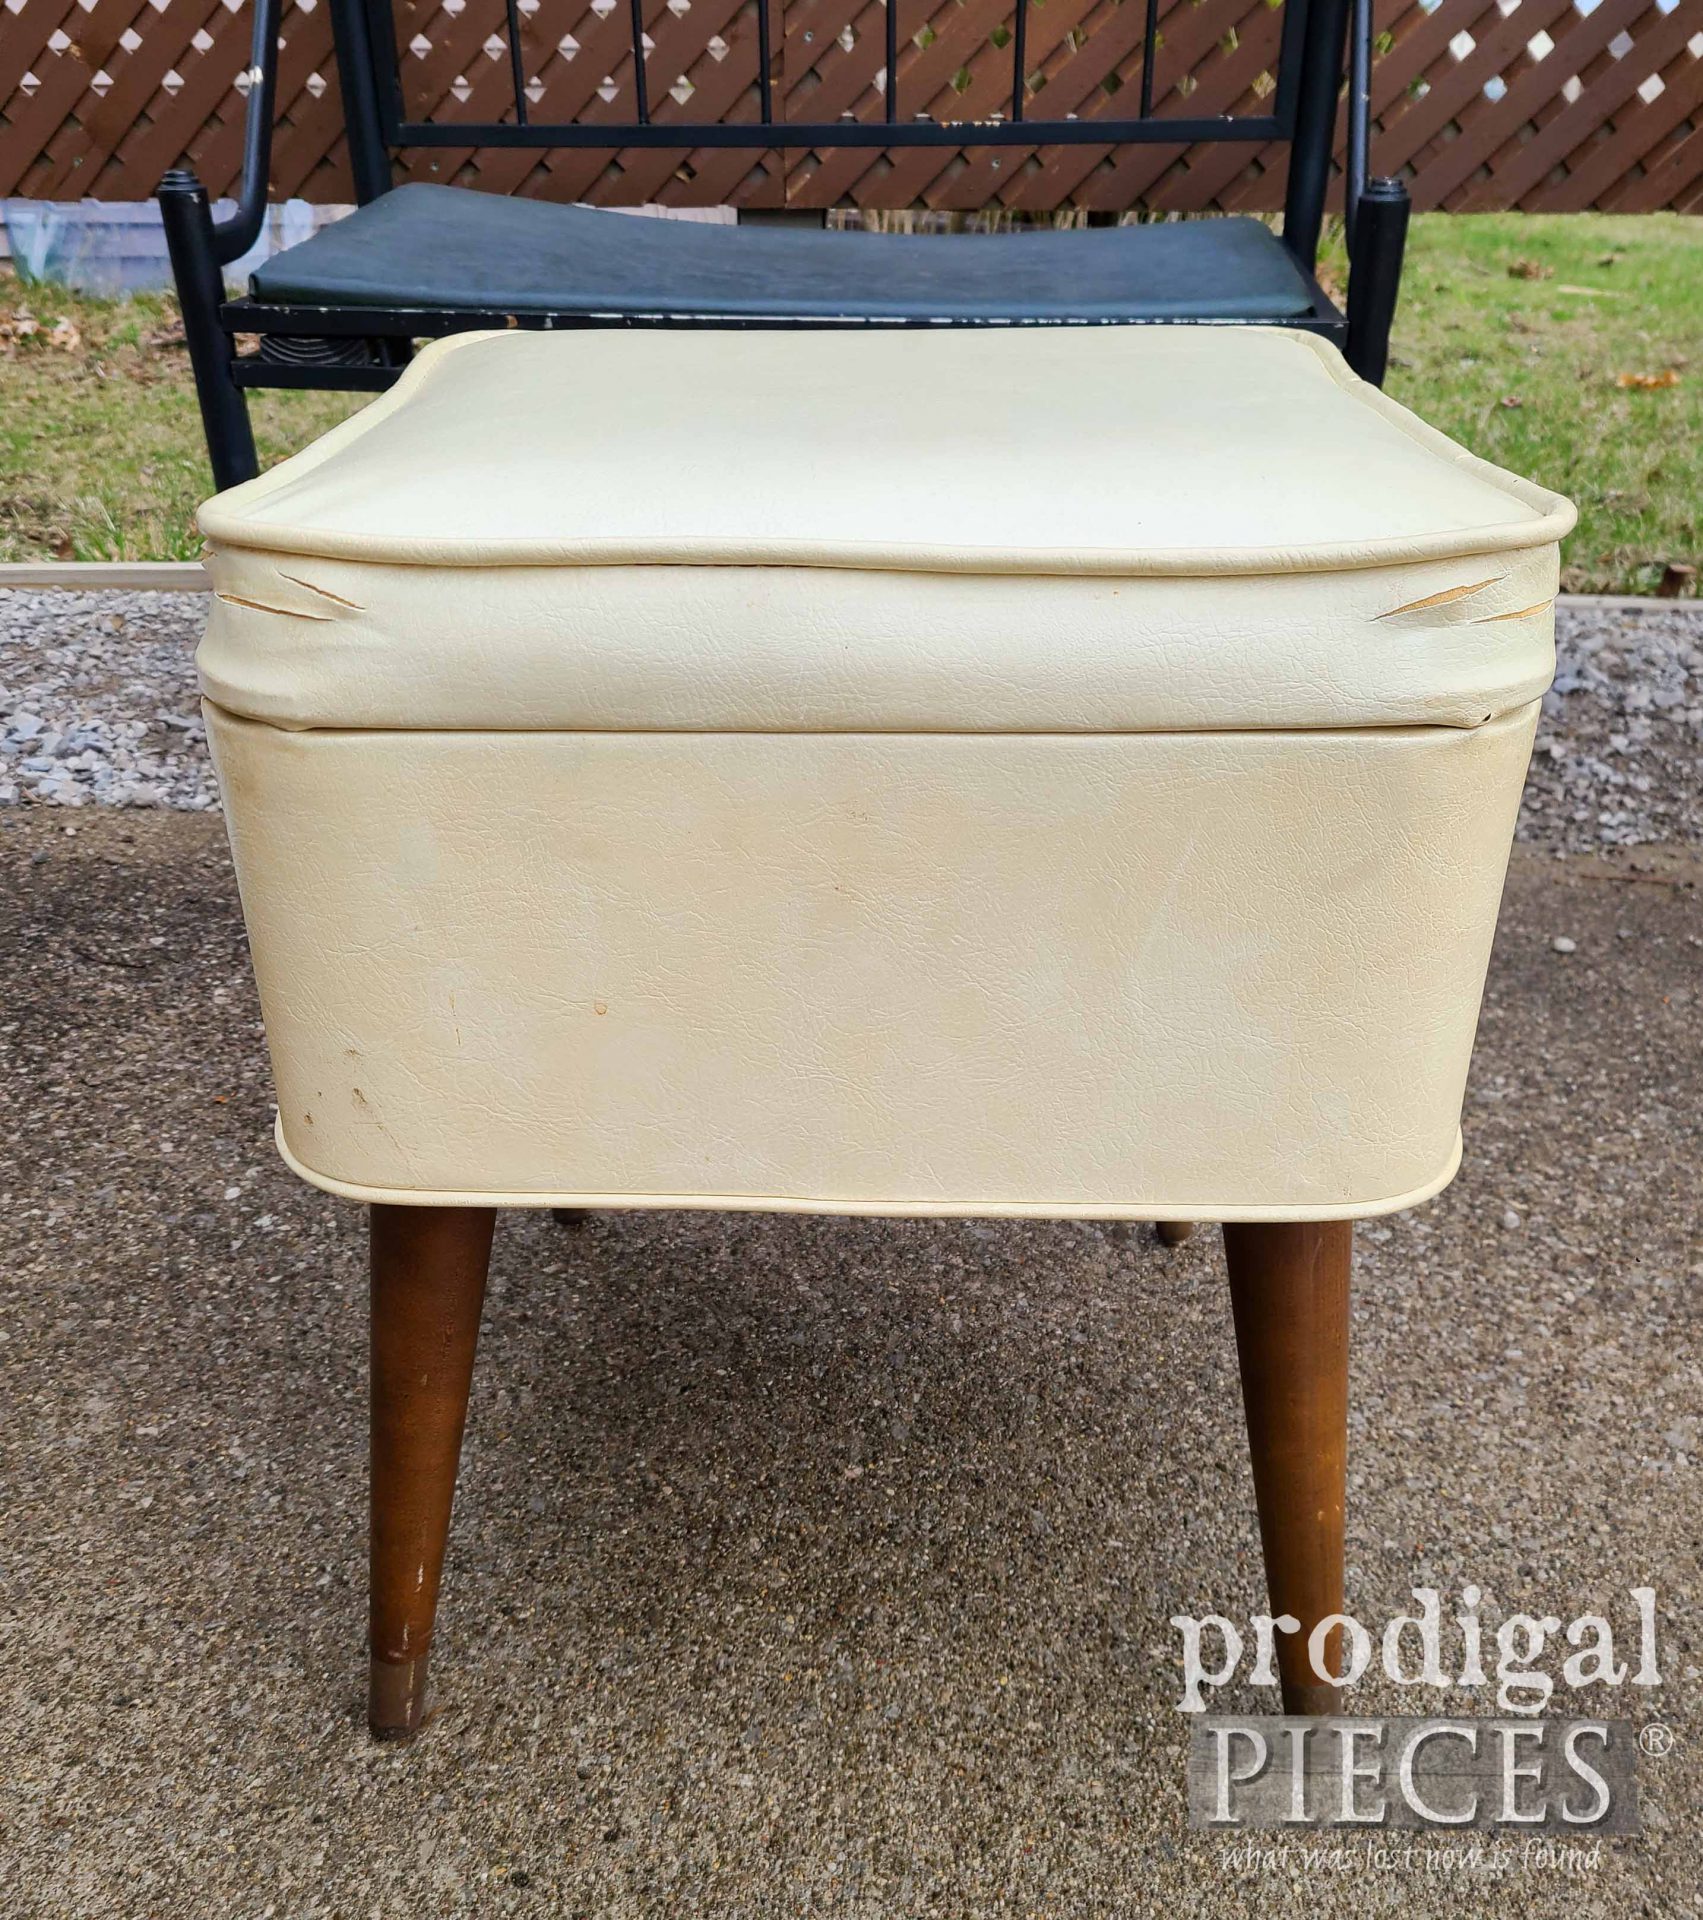 Vintage Mid Century Modern Sewing Stool Before by Larissa of Prodigal Pieces | prodigalpieces.com #prodigalpieces